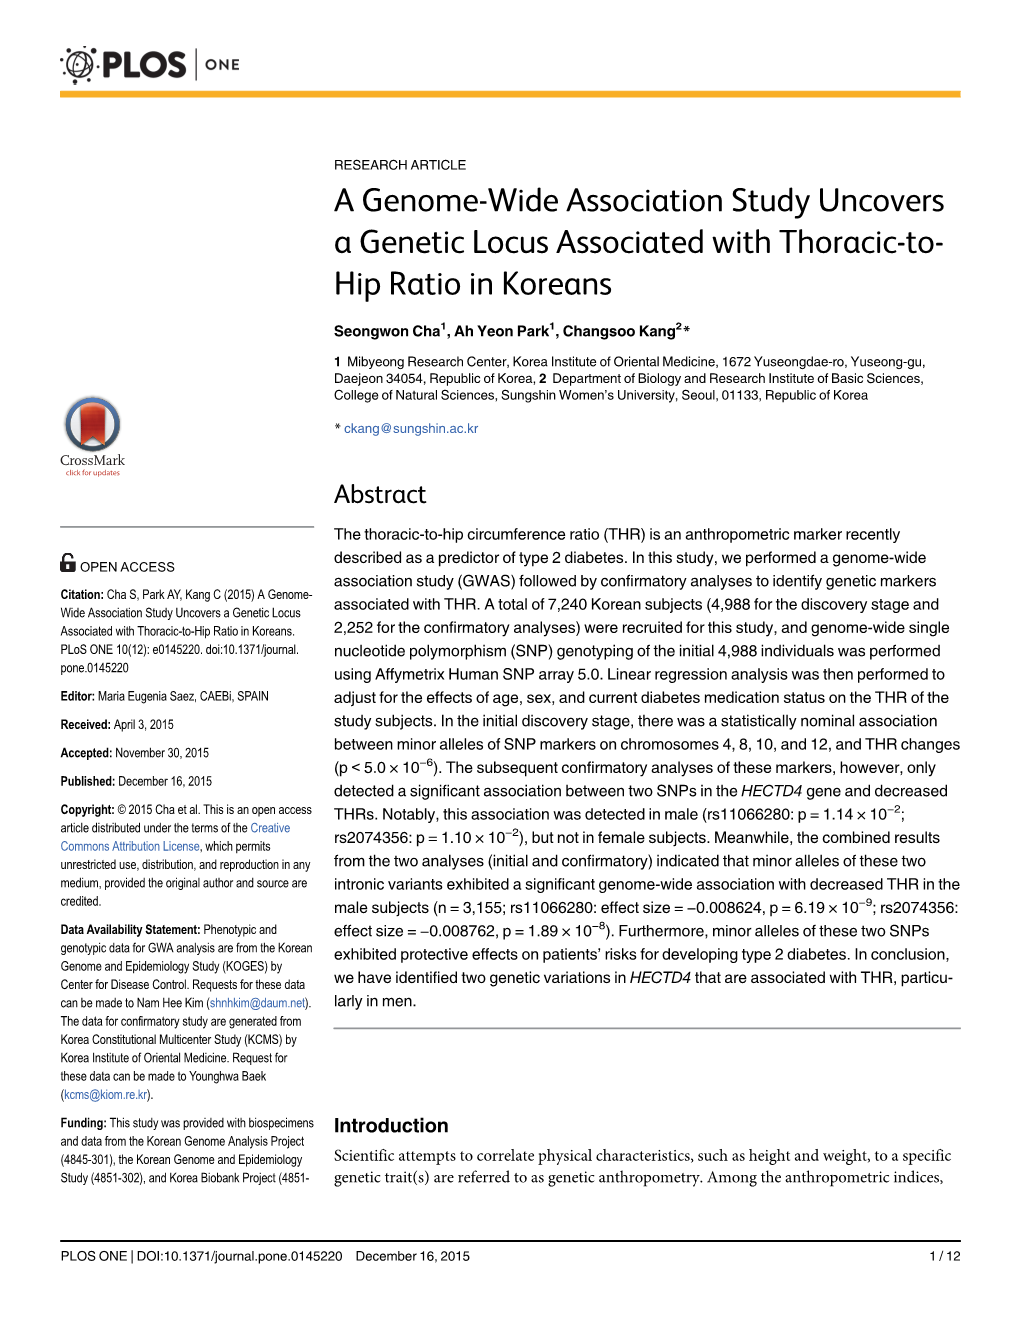 A Genome-Wide Association Study Uncovers a Genetic Locus Associated with Thoracic-To- Hip Ratio in Koreans